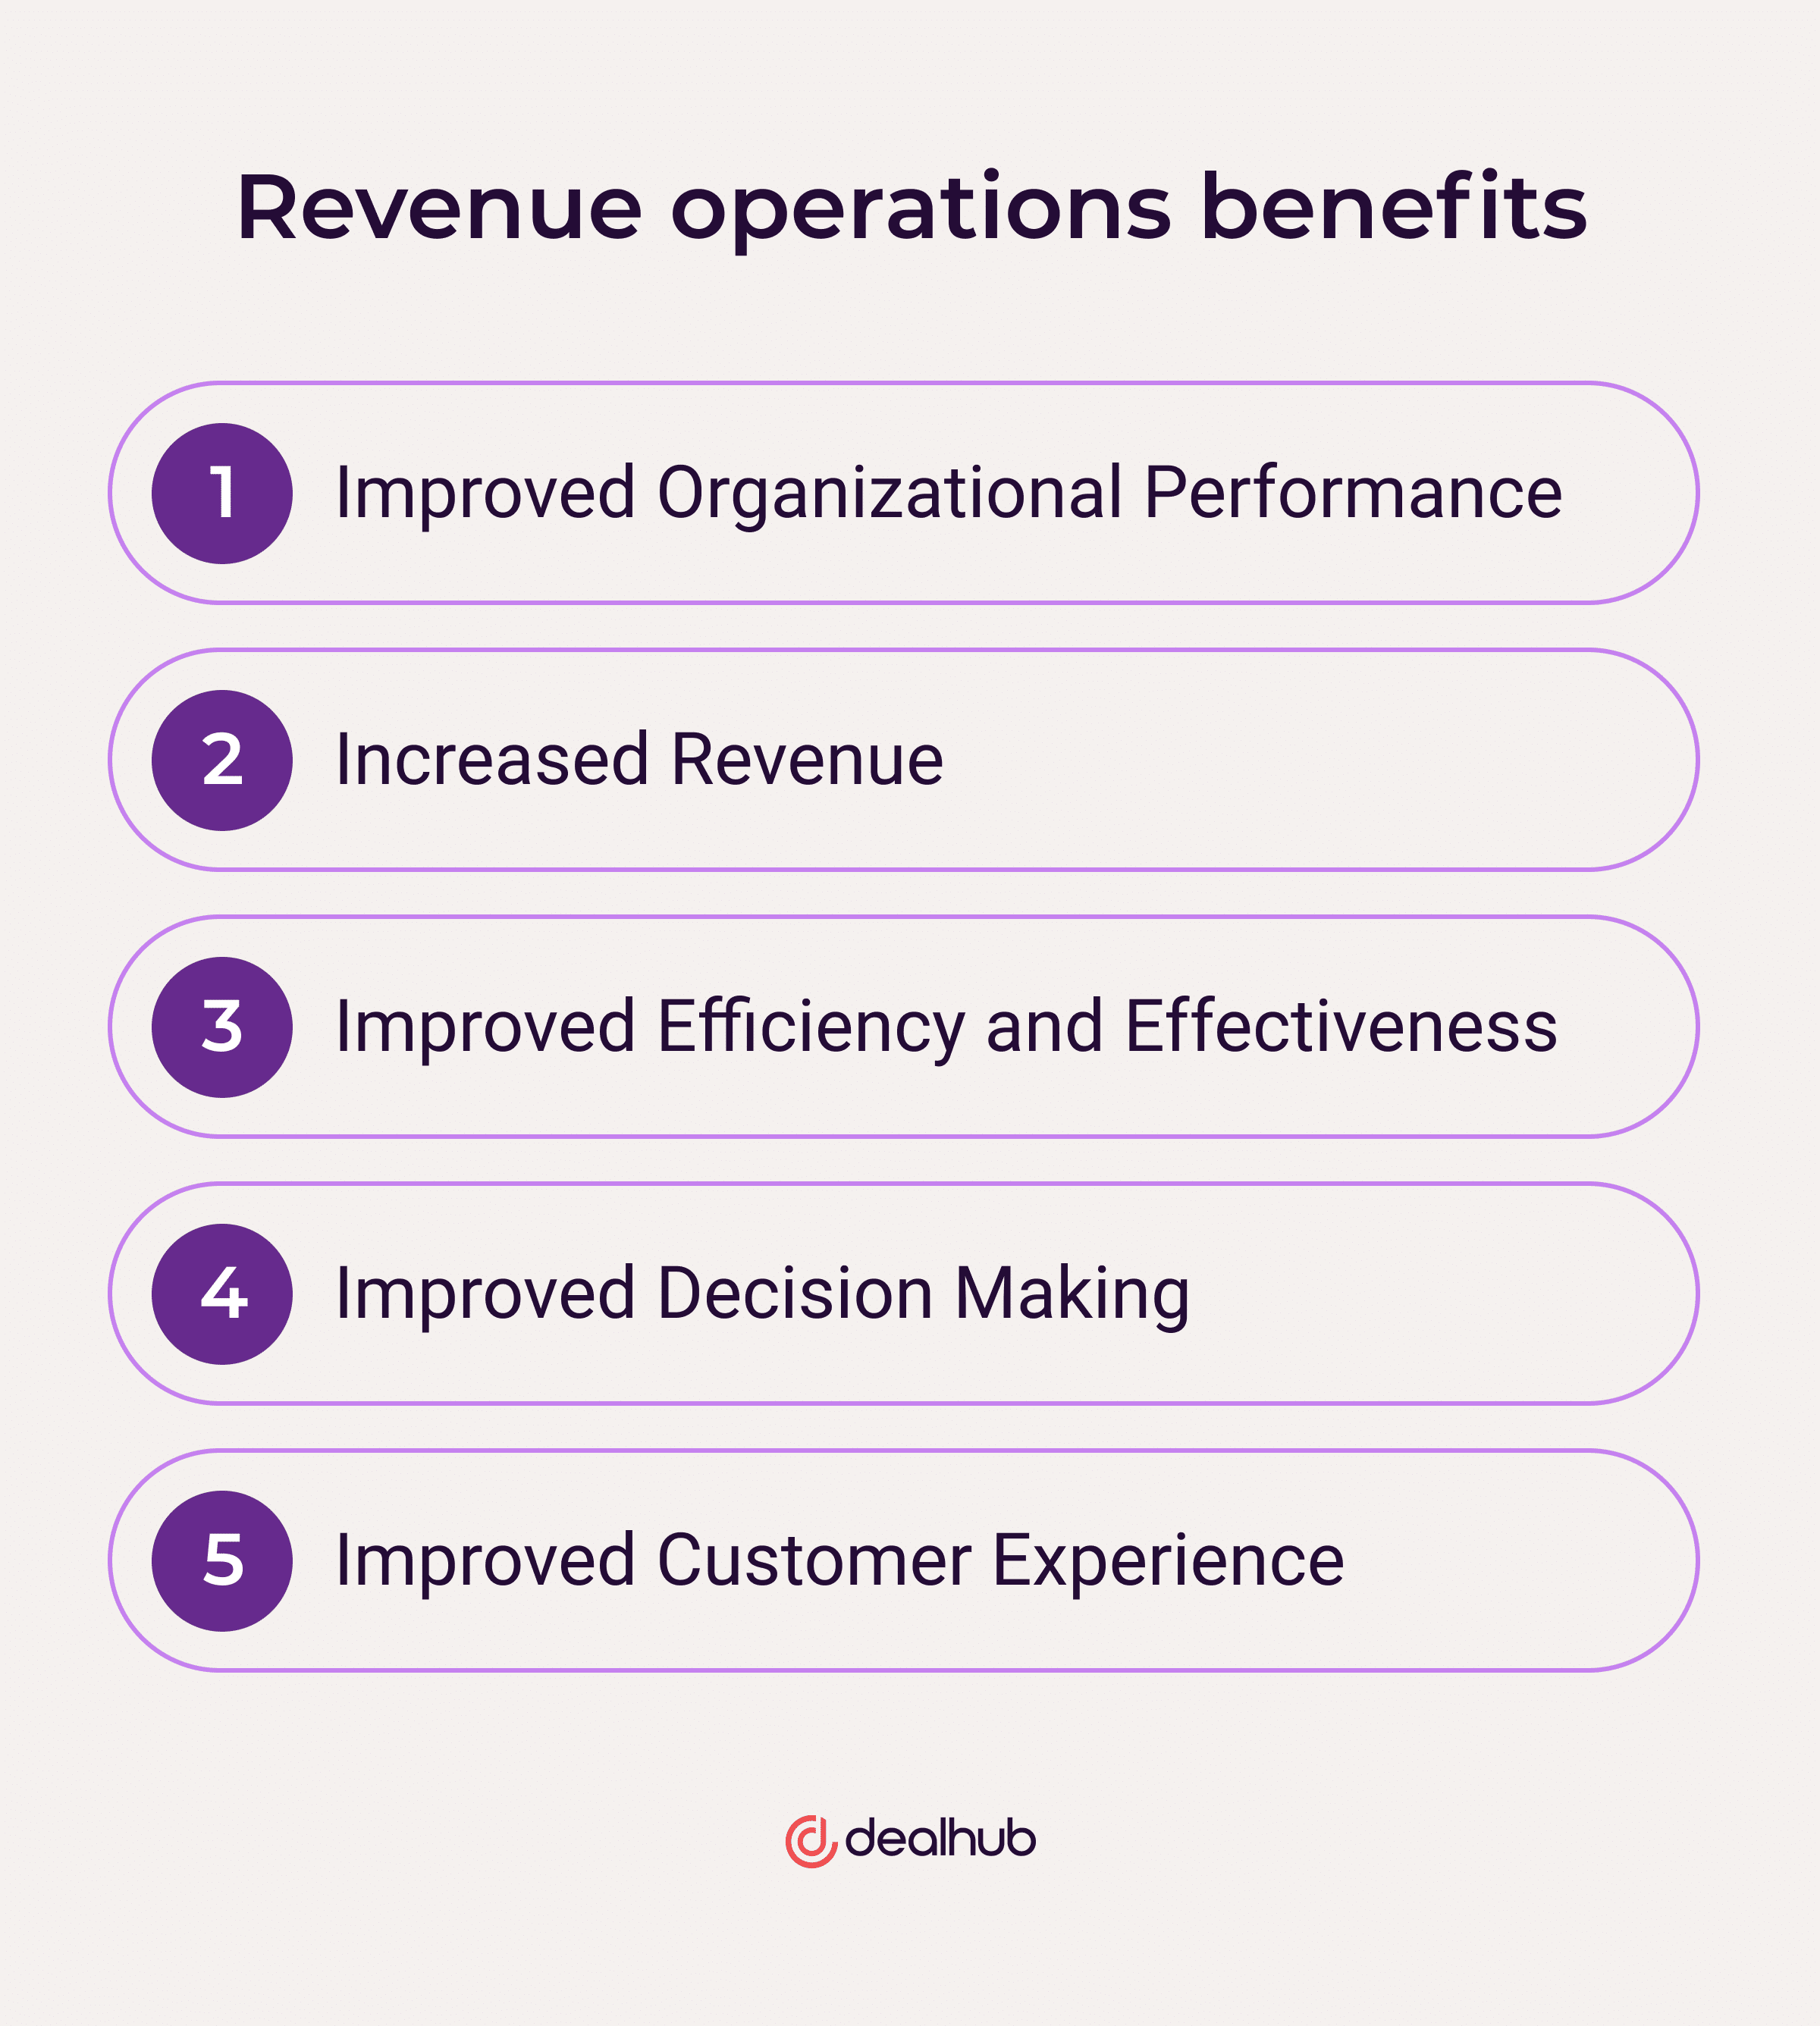 The Benefits of Implementing Revenue Operations